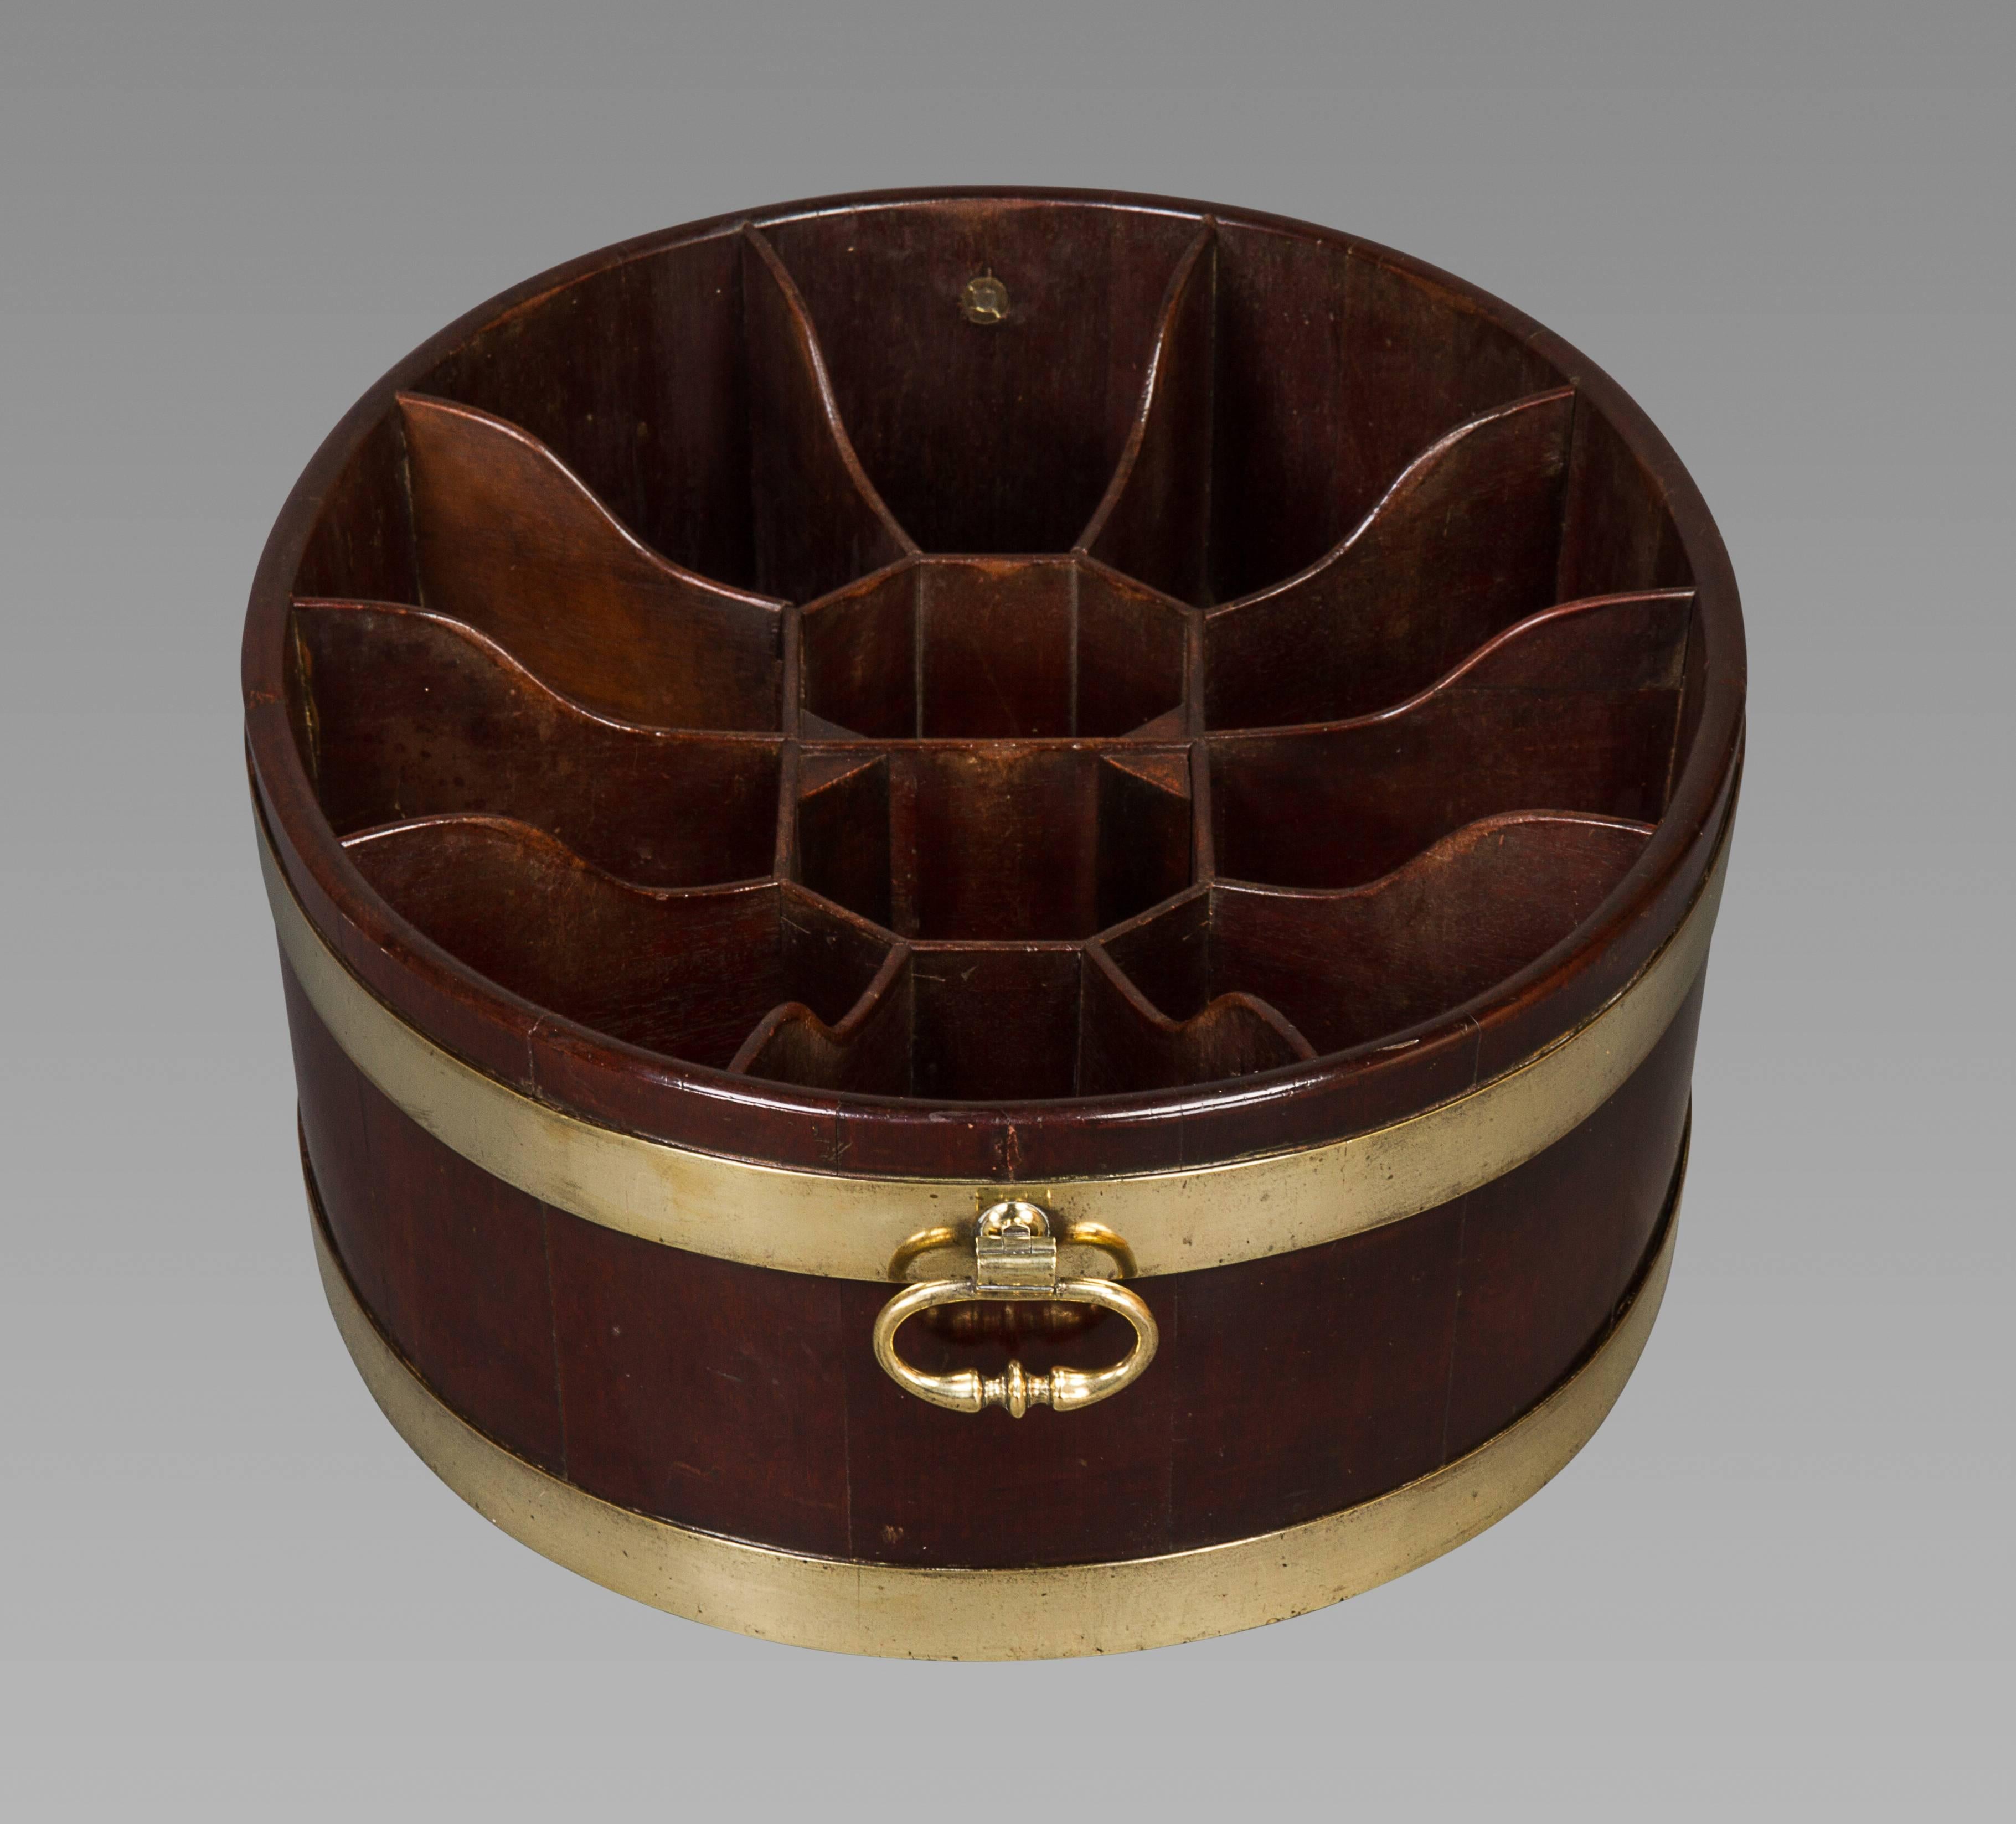 Of traditional shape for a wine cooler of the mid to late 18th century, this piece is somewhat of a conundrum. The brass bound staved oval piece has a fitted interior divided into twelve sections that are original to the piece. On first glance it